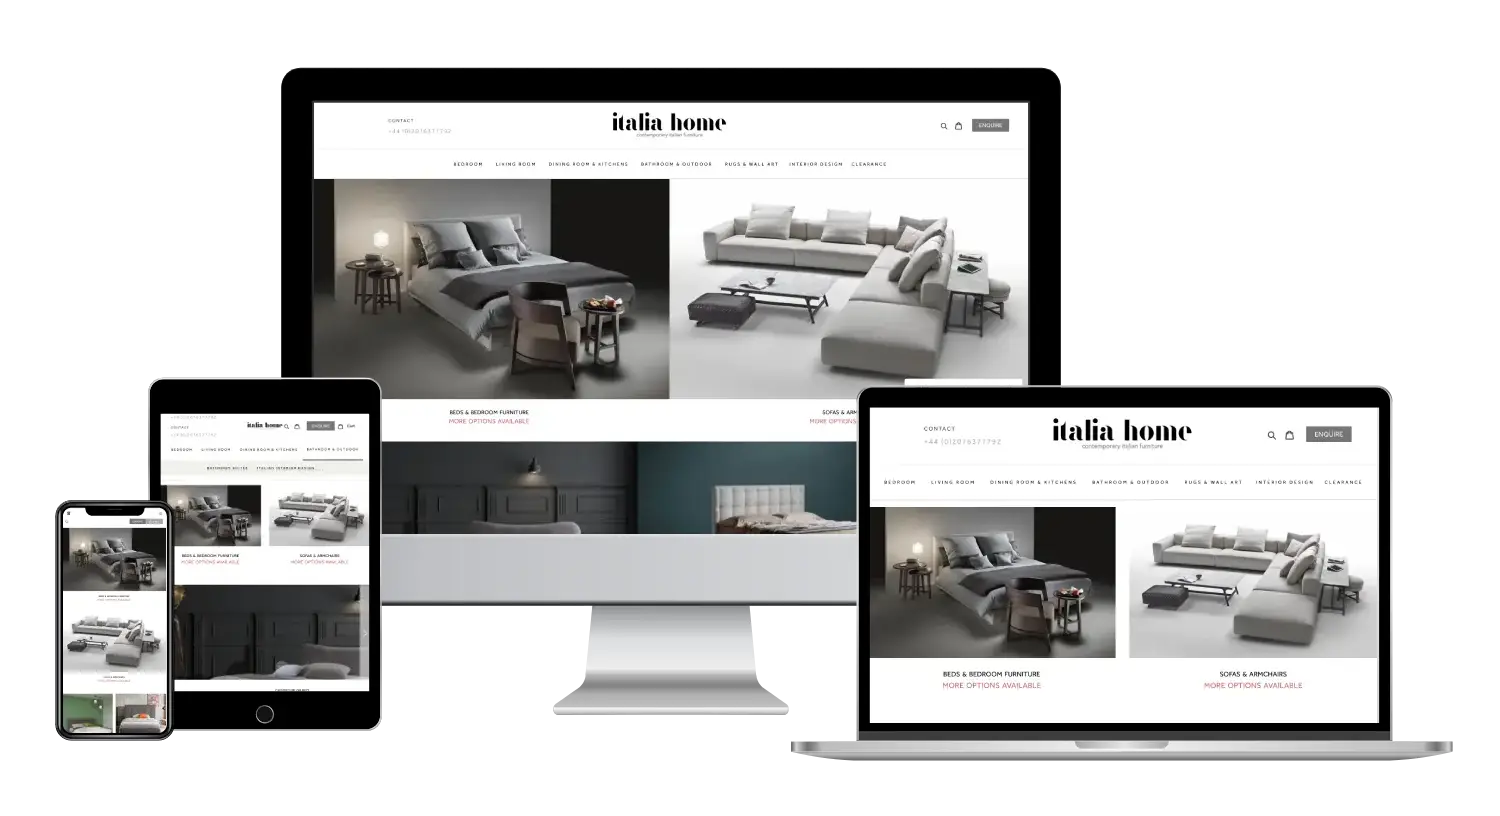 Italiahome.co.uk is an home decor online platform